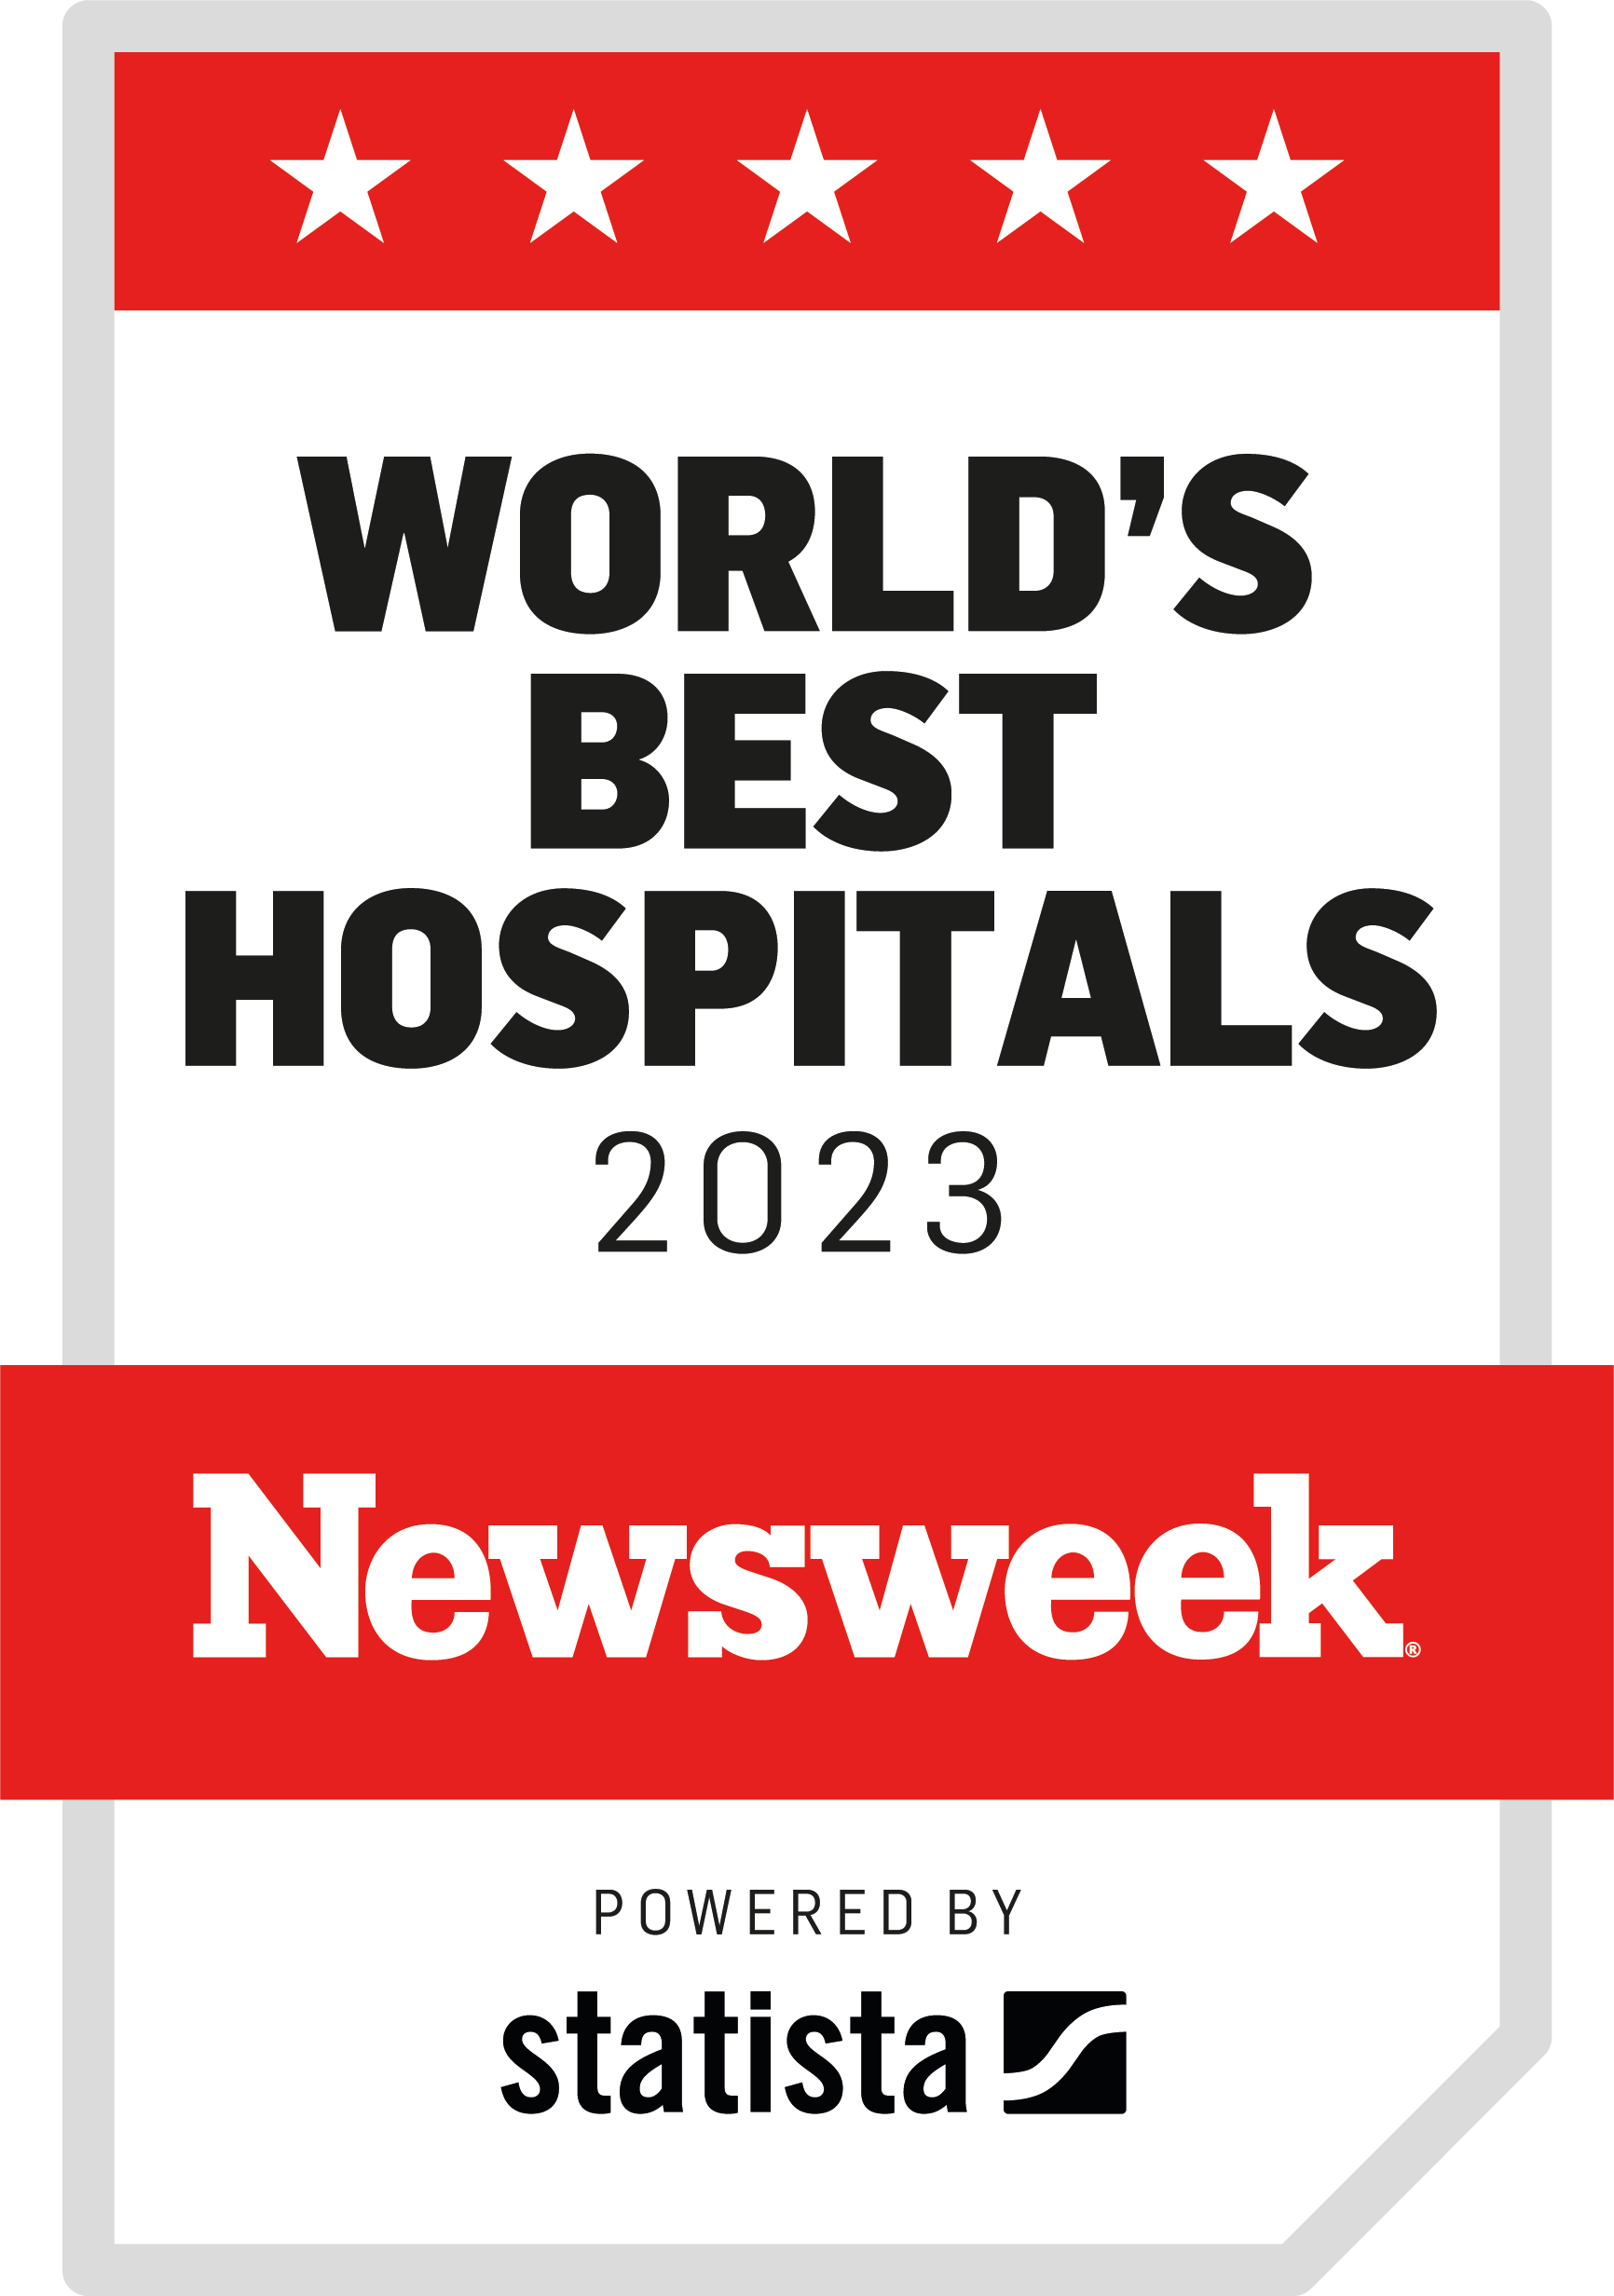 TGH Named to Newsweek's World's Best Hospitals 2022 List and One of Only 3 Florida Hospitals in